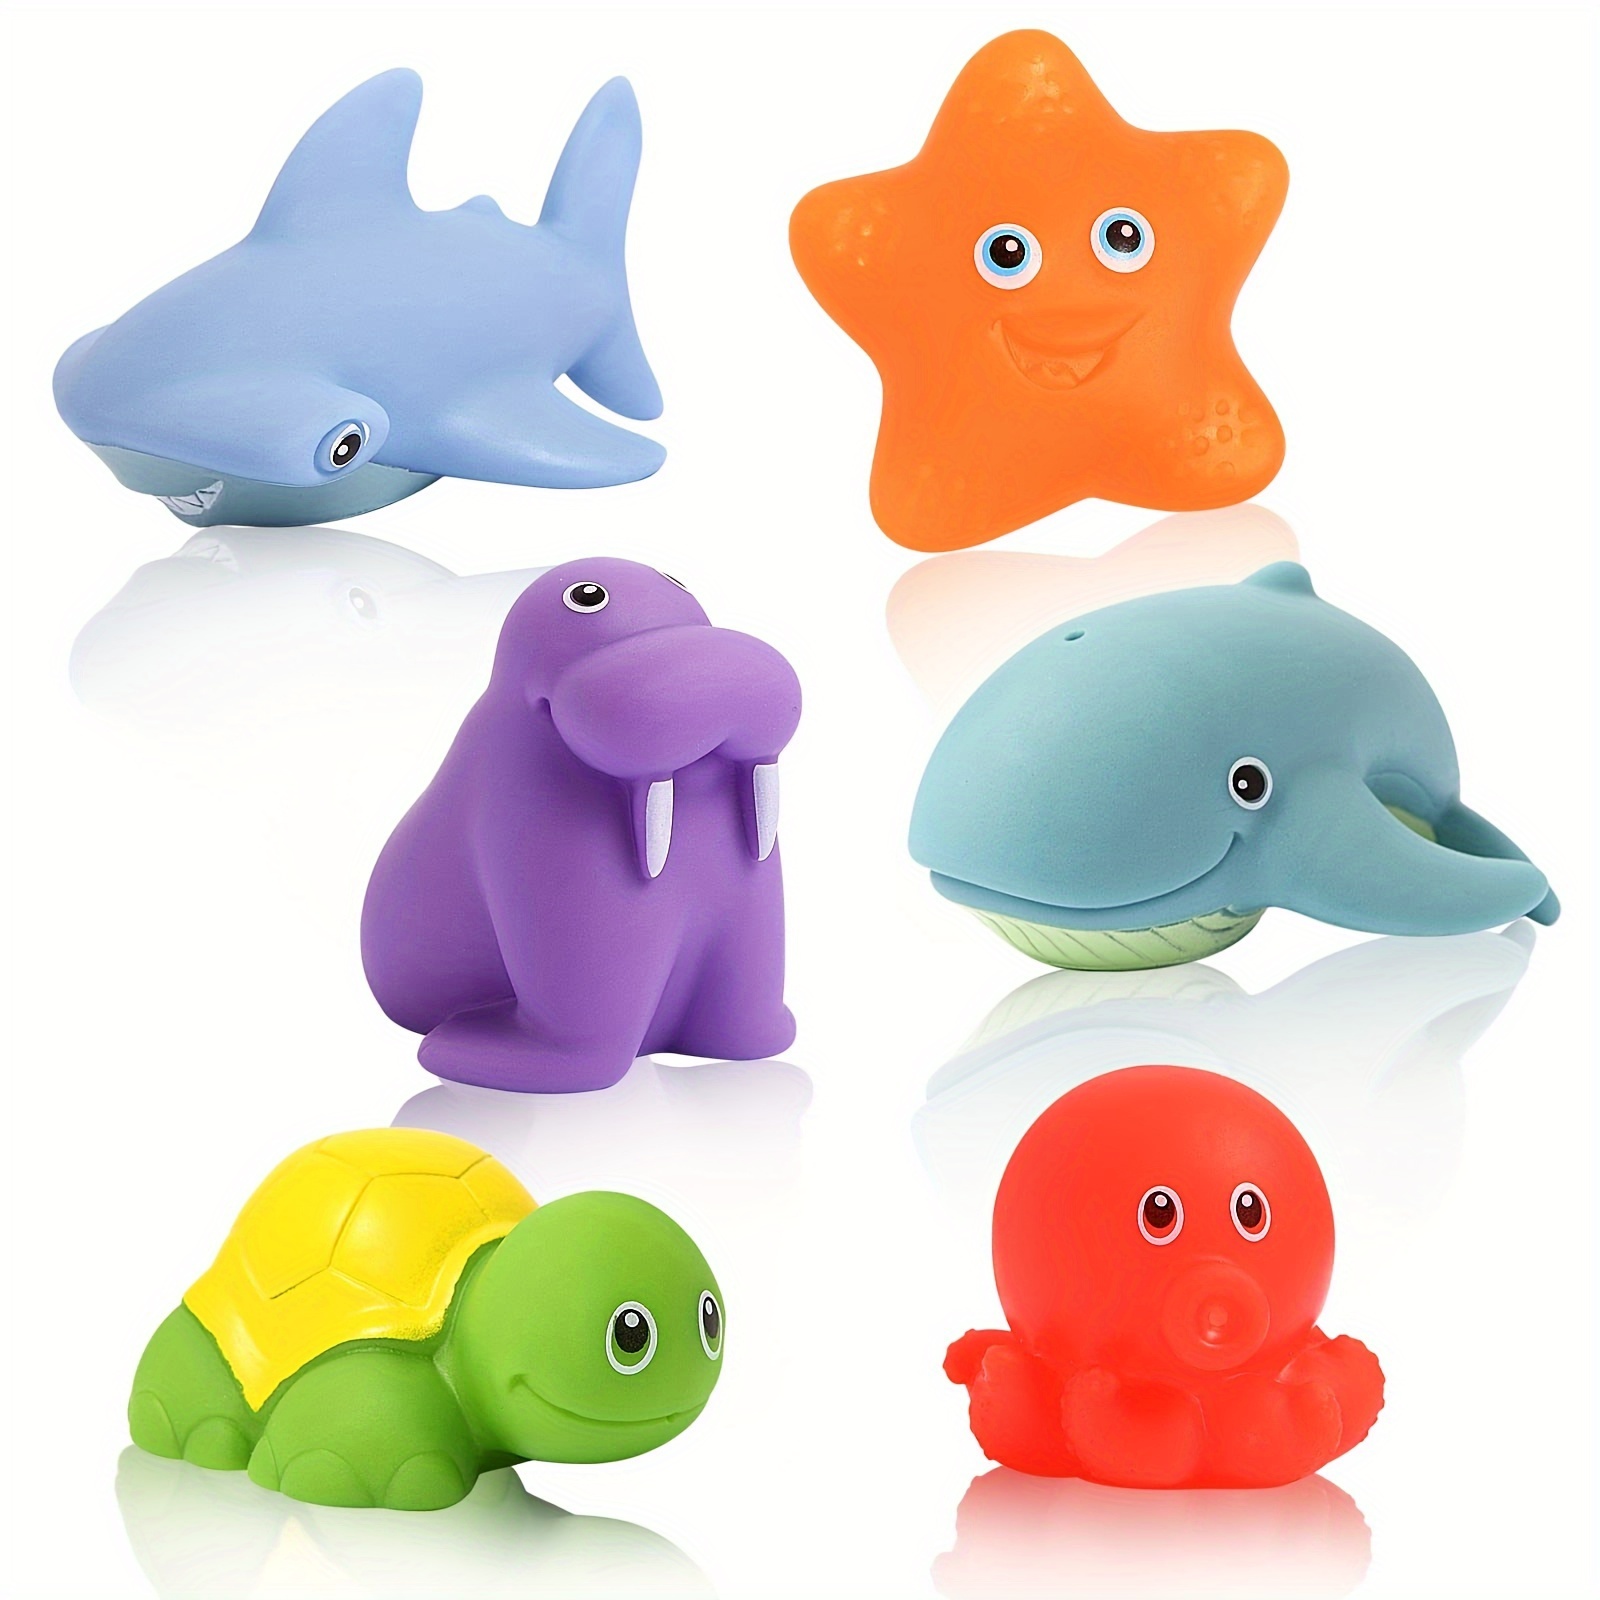 

6pcs Soft Rubber Animals, Bath Toys, Ocean Animals Bathtub Shower Toys, Bathtub Toys Water Spray Color Changing Floating Ocean Animals, Swimming Toys